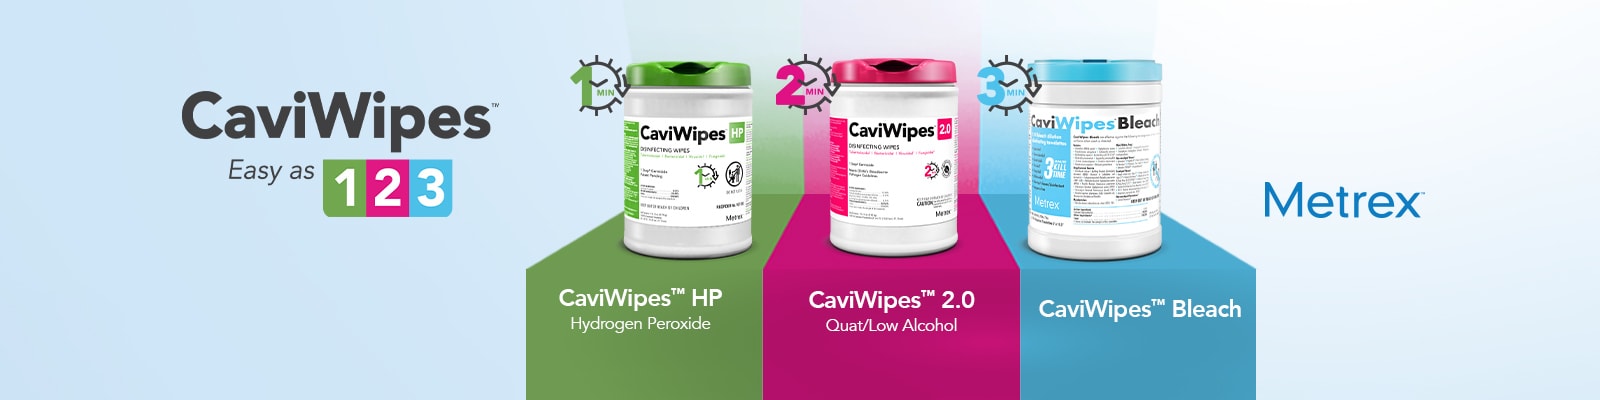 Metrex Caviwipes | Disinfectants and Infection Prevention